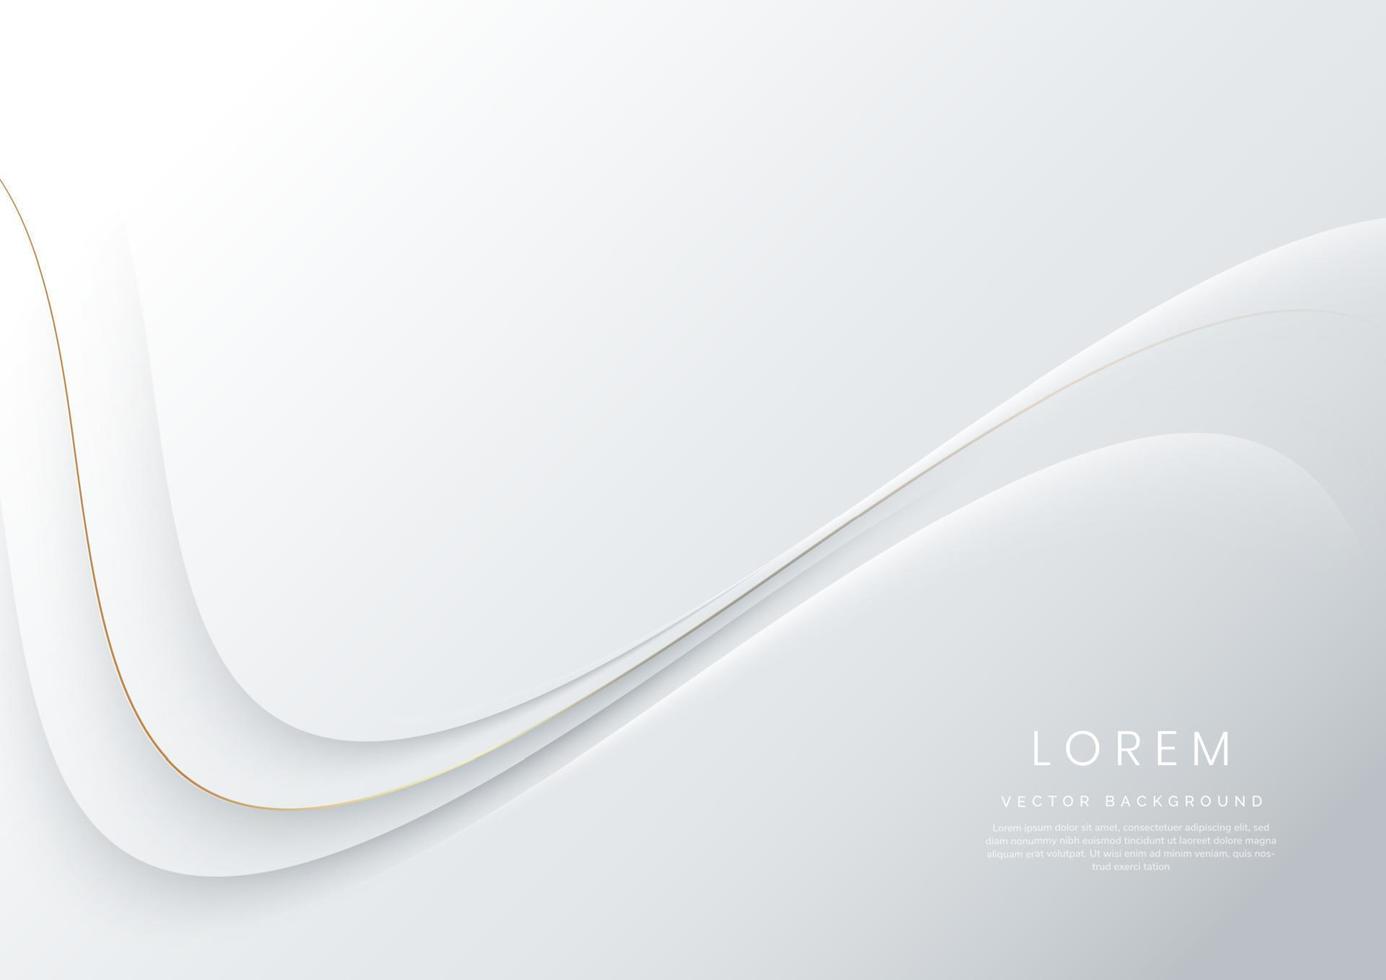 Abstract 3d white curved background with copy space for text. Luxury style template design. Vector illustration